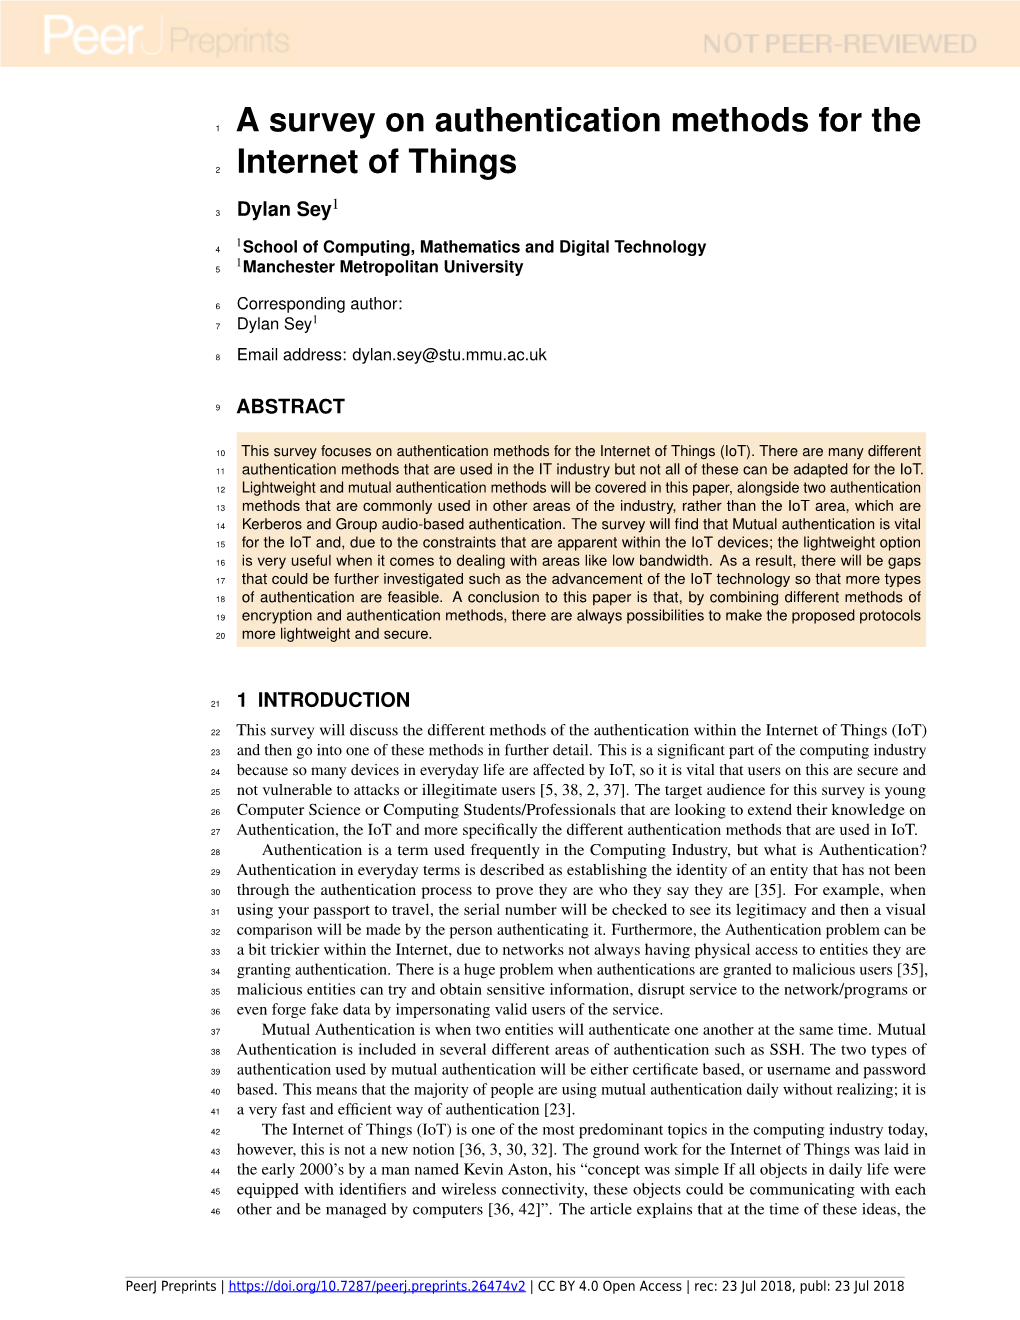 A Survey on Authentication Methods for the Internet of Things